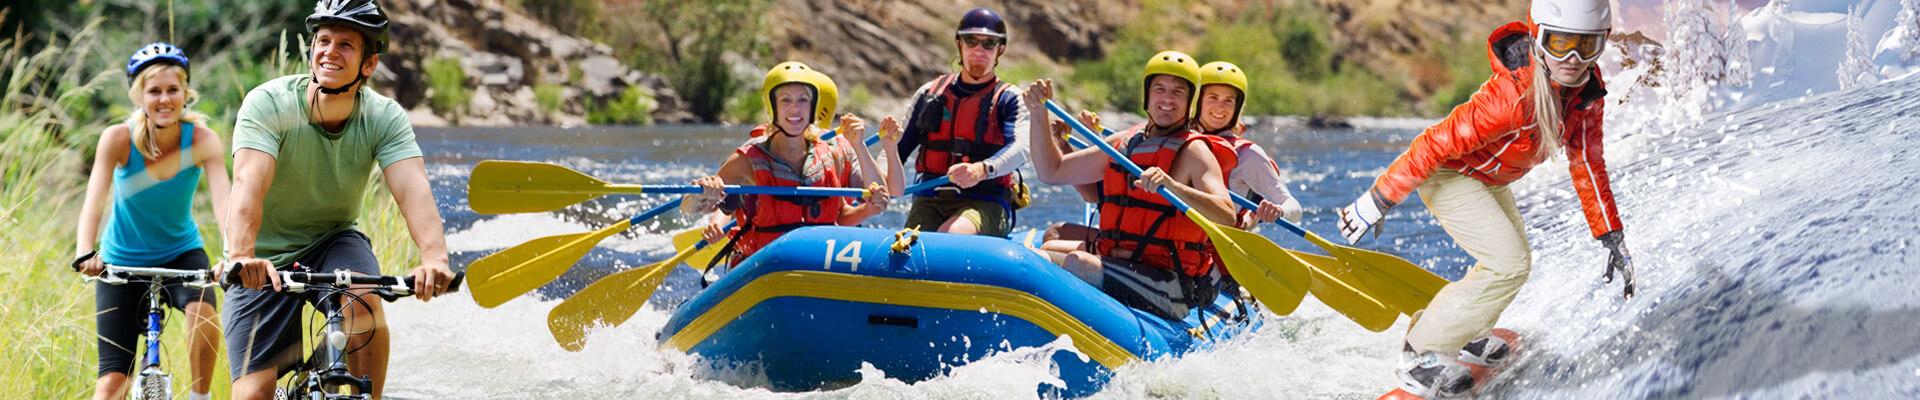 A group of people whitewater rafting